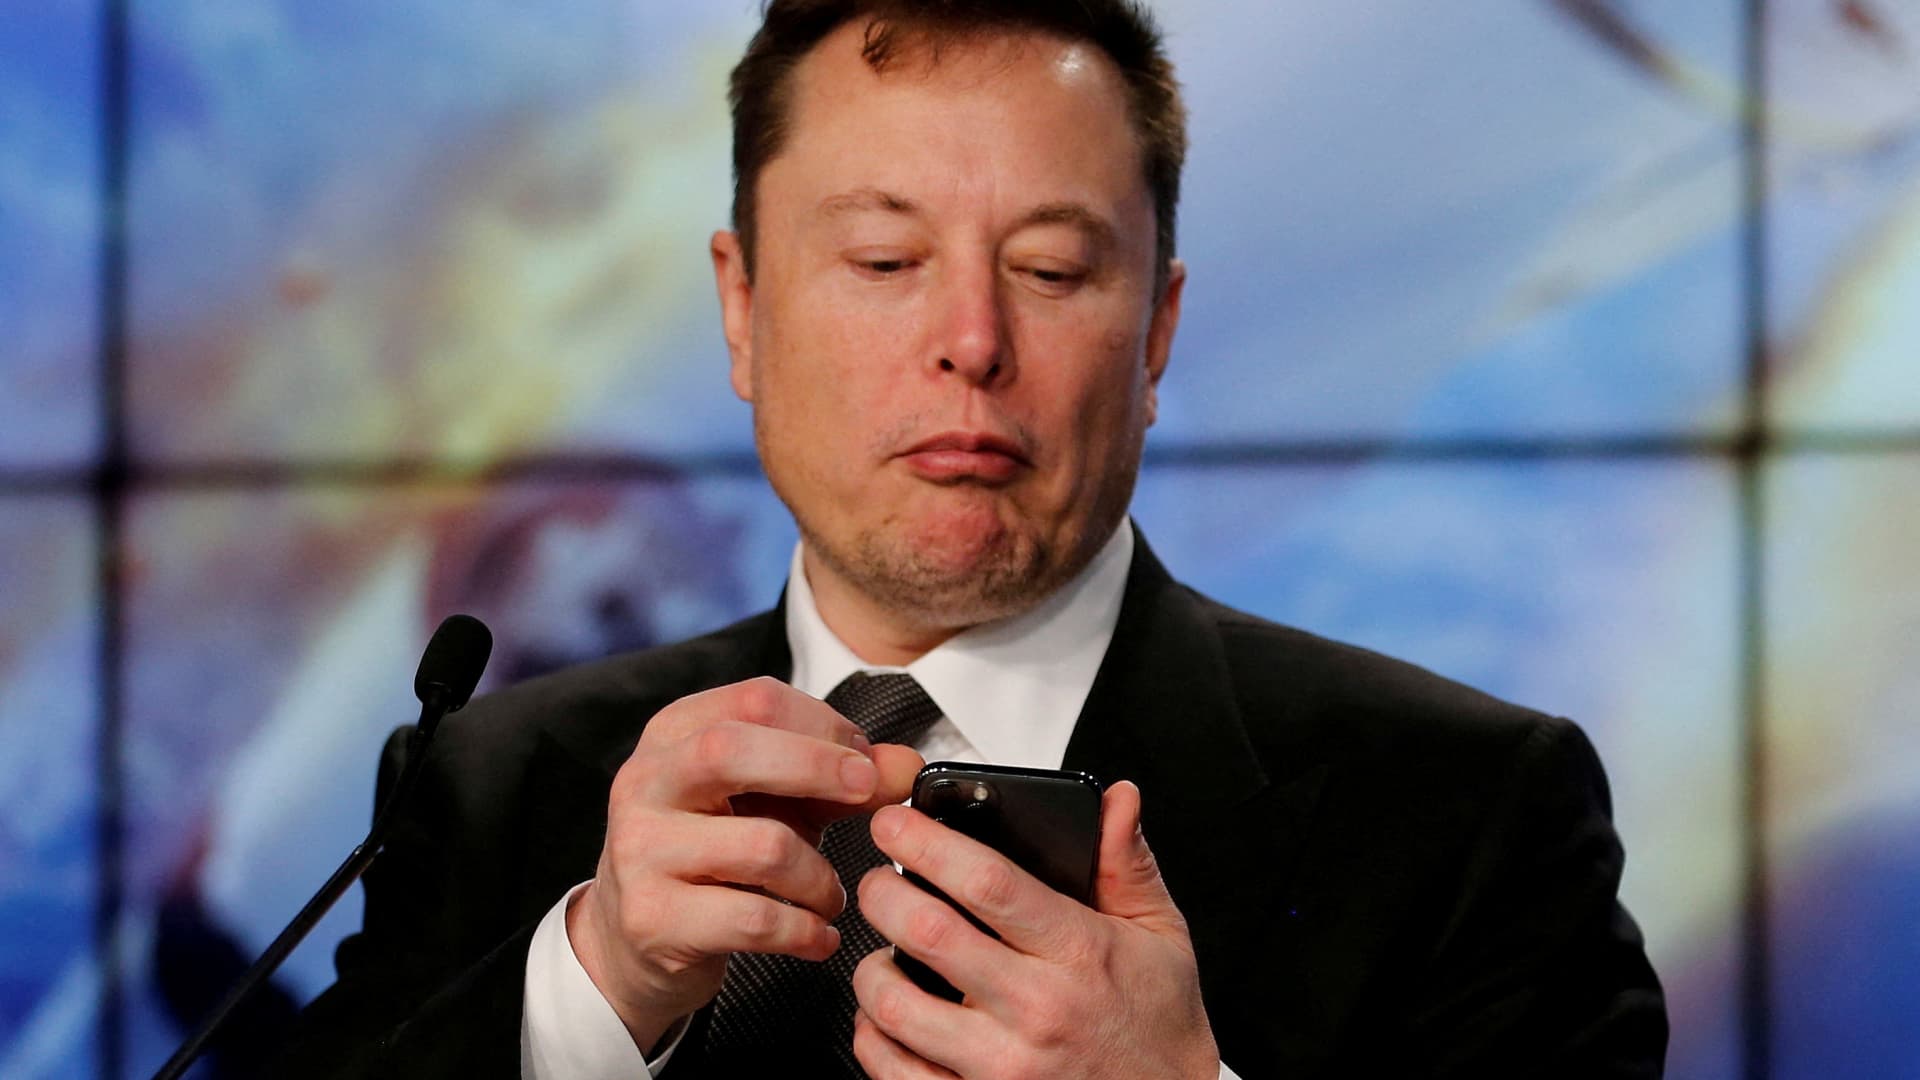 Elon Musk has been expressing buyer's remorse over Twitter for months